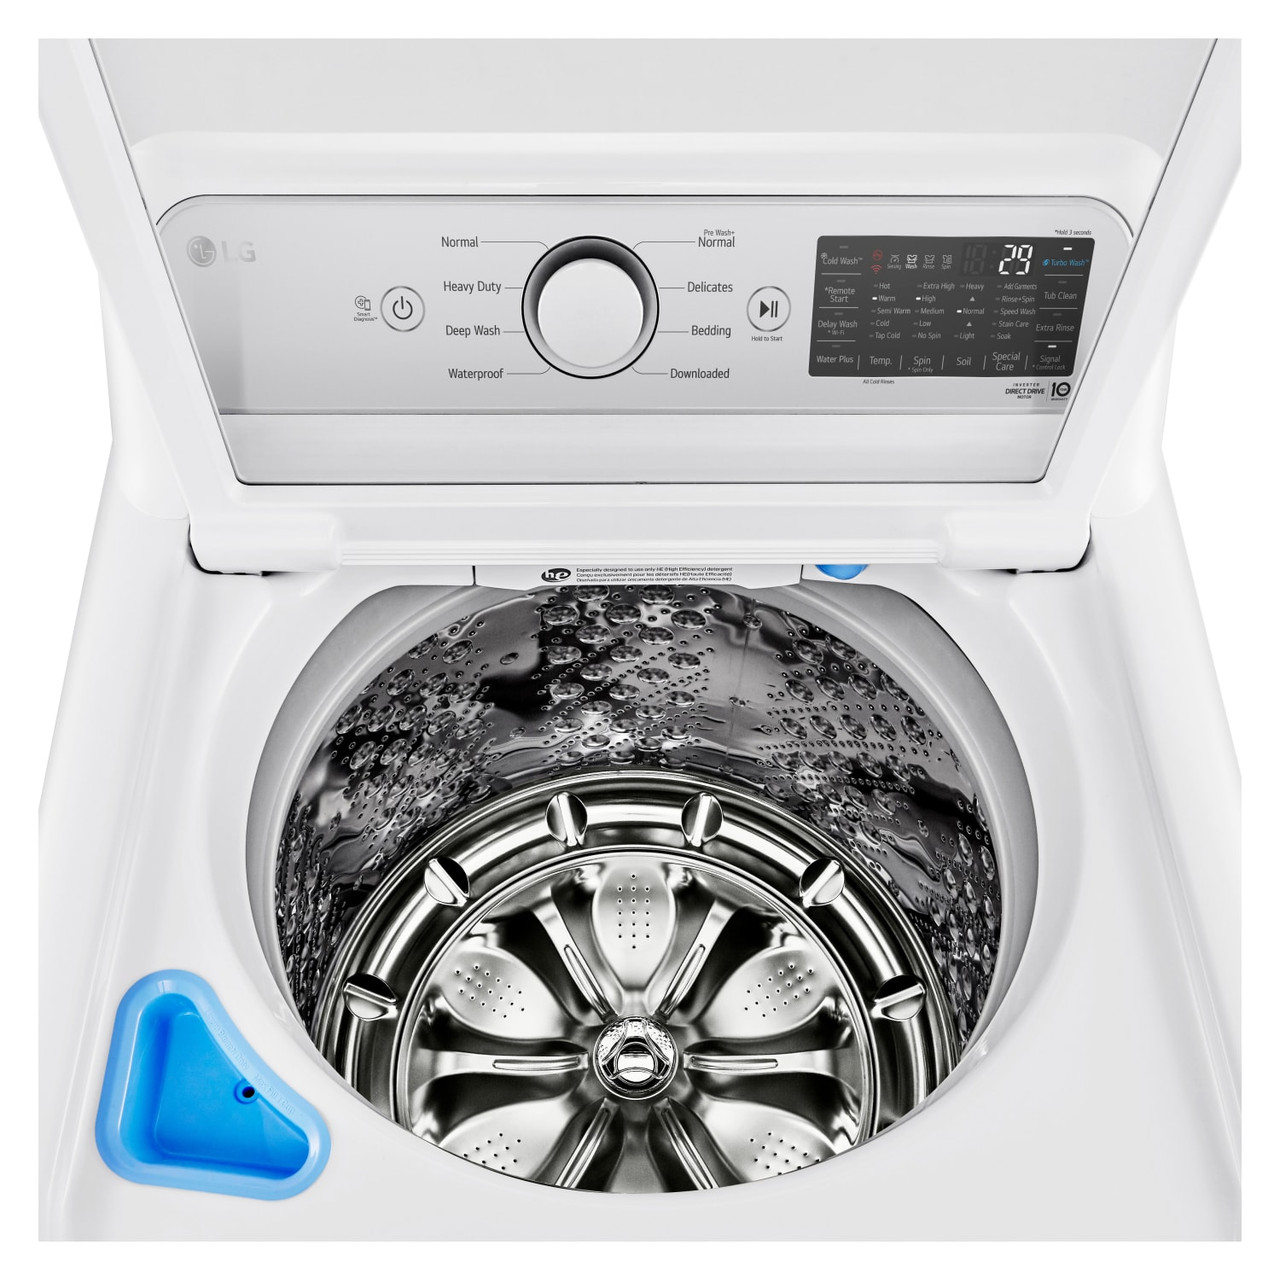 LG 5.5 cu.ft. Mega Capacity Smart wi-fi Enabled Top Load Washer with TurboWash3D Technology - WT7400CW